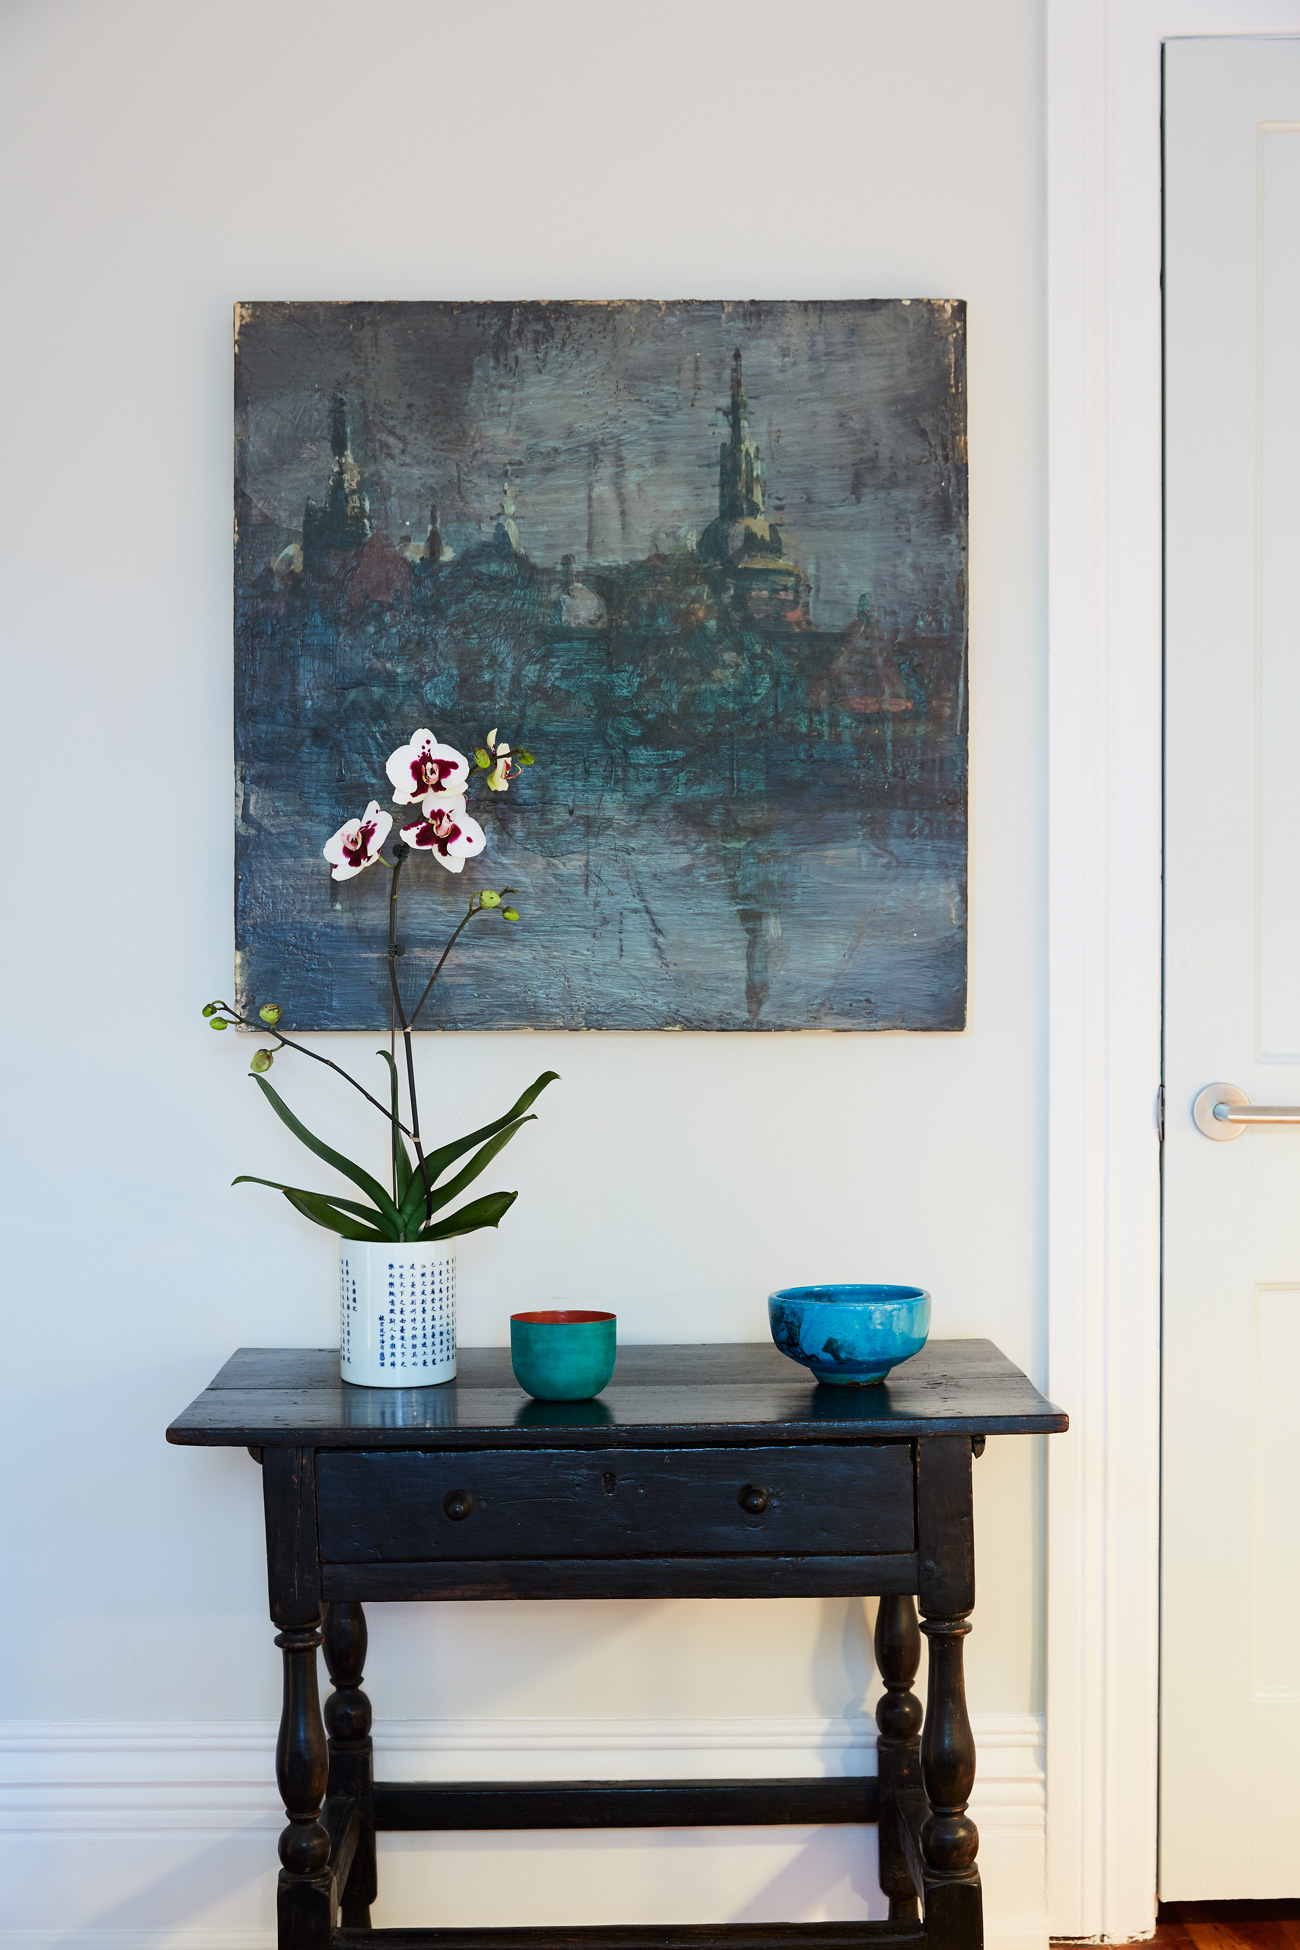 Above the 19th century English Tavern Table hangs an encaustic painting by Tony Scherman.
